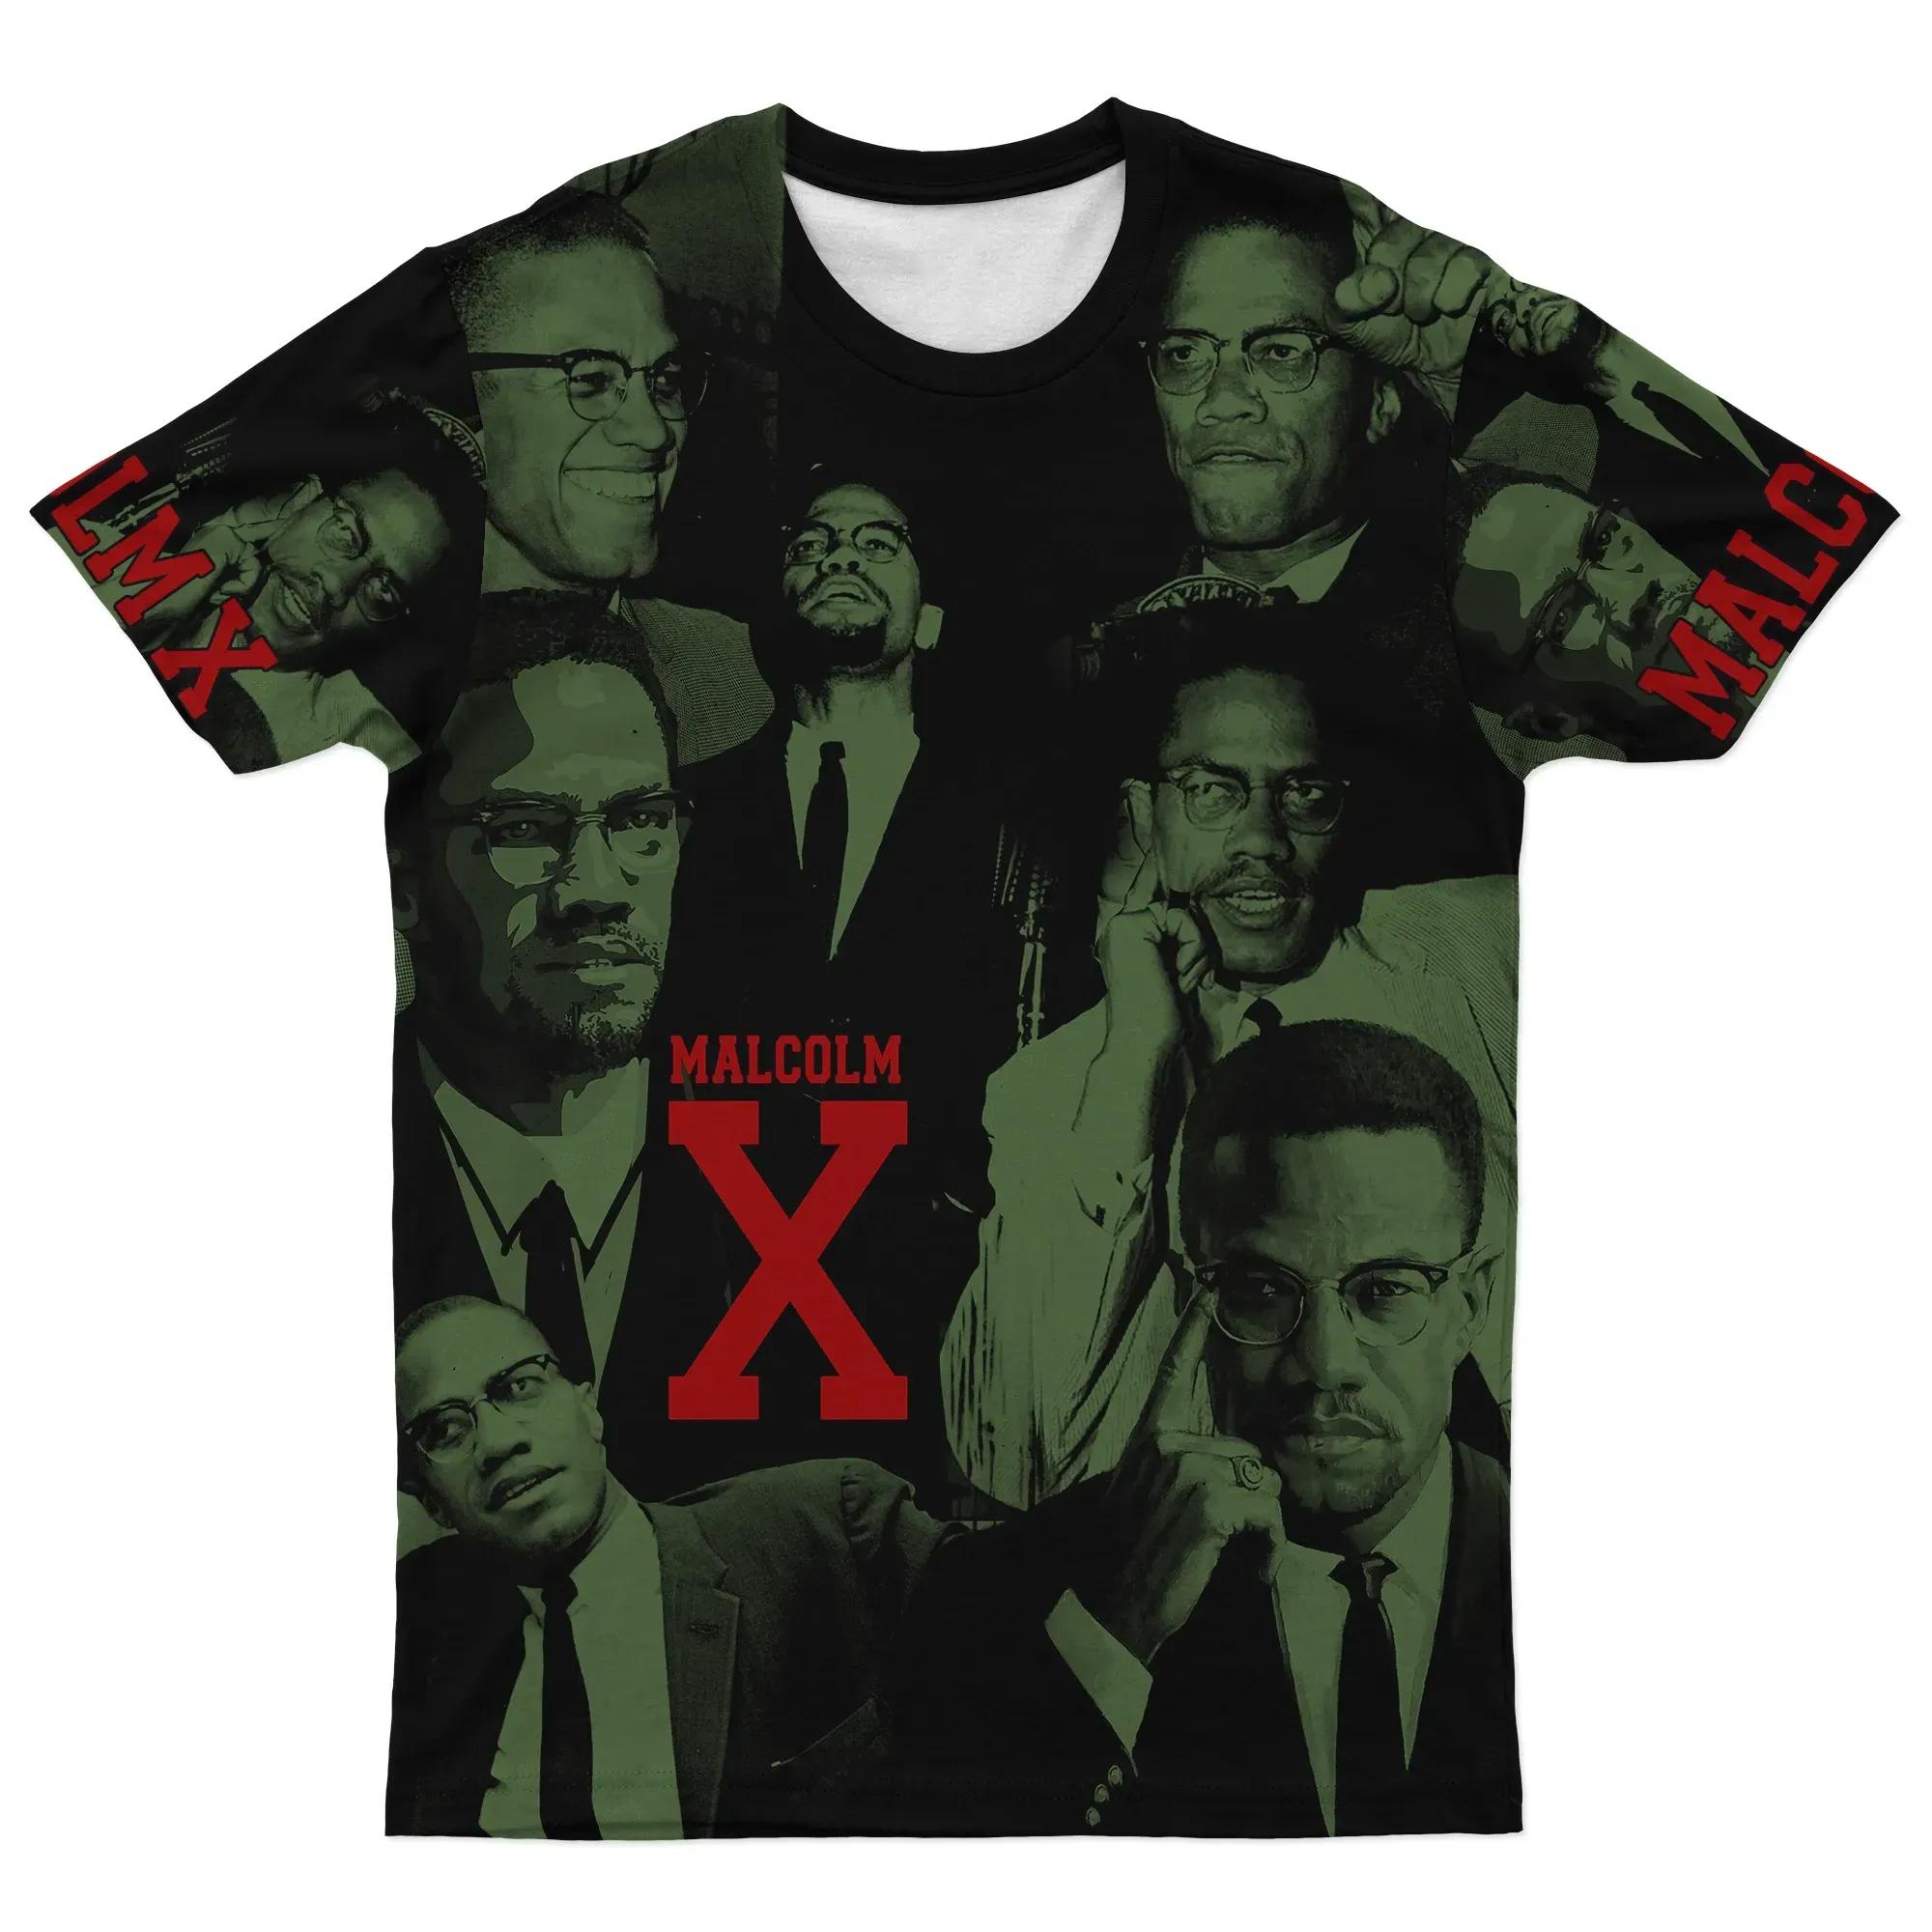 African T-shirt – MALCOLM X Image Tee